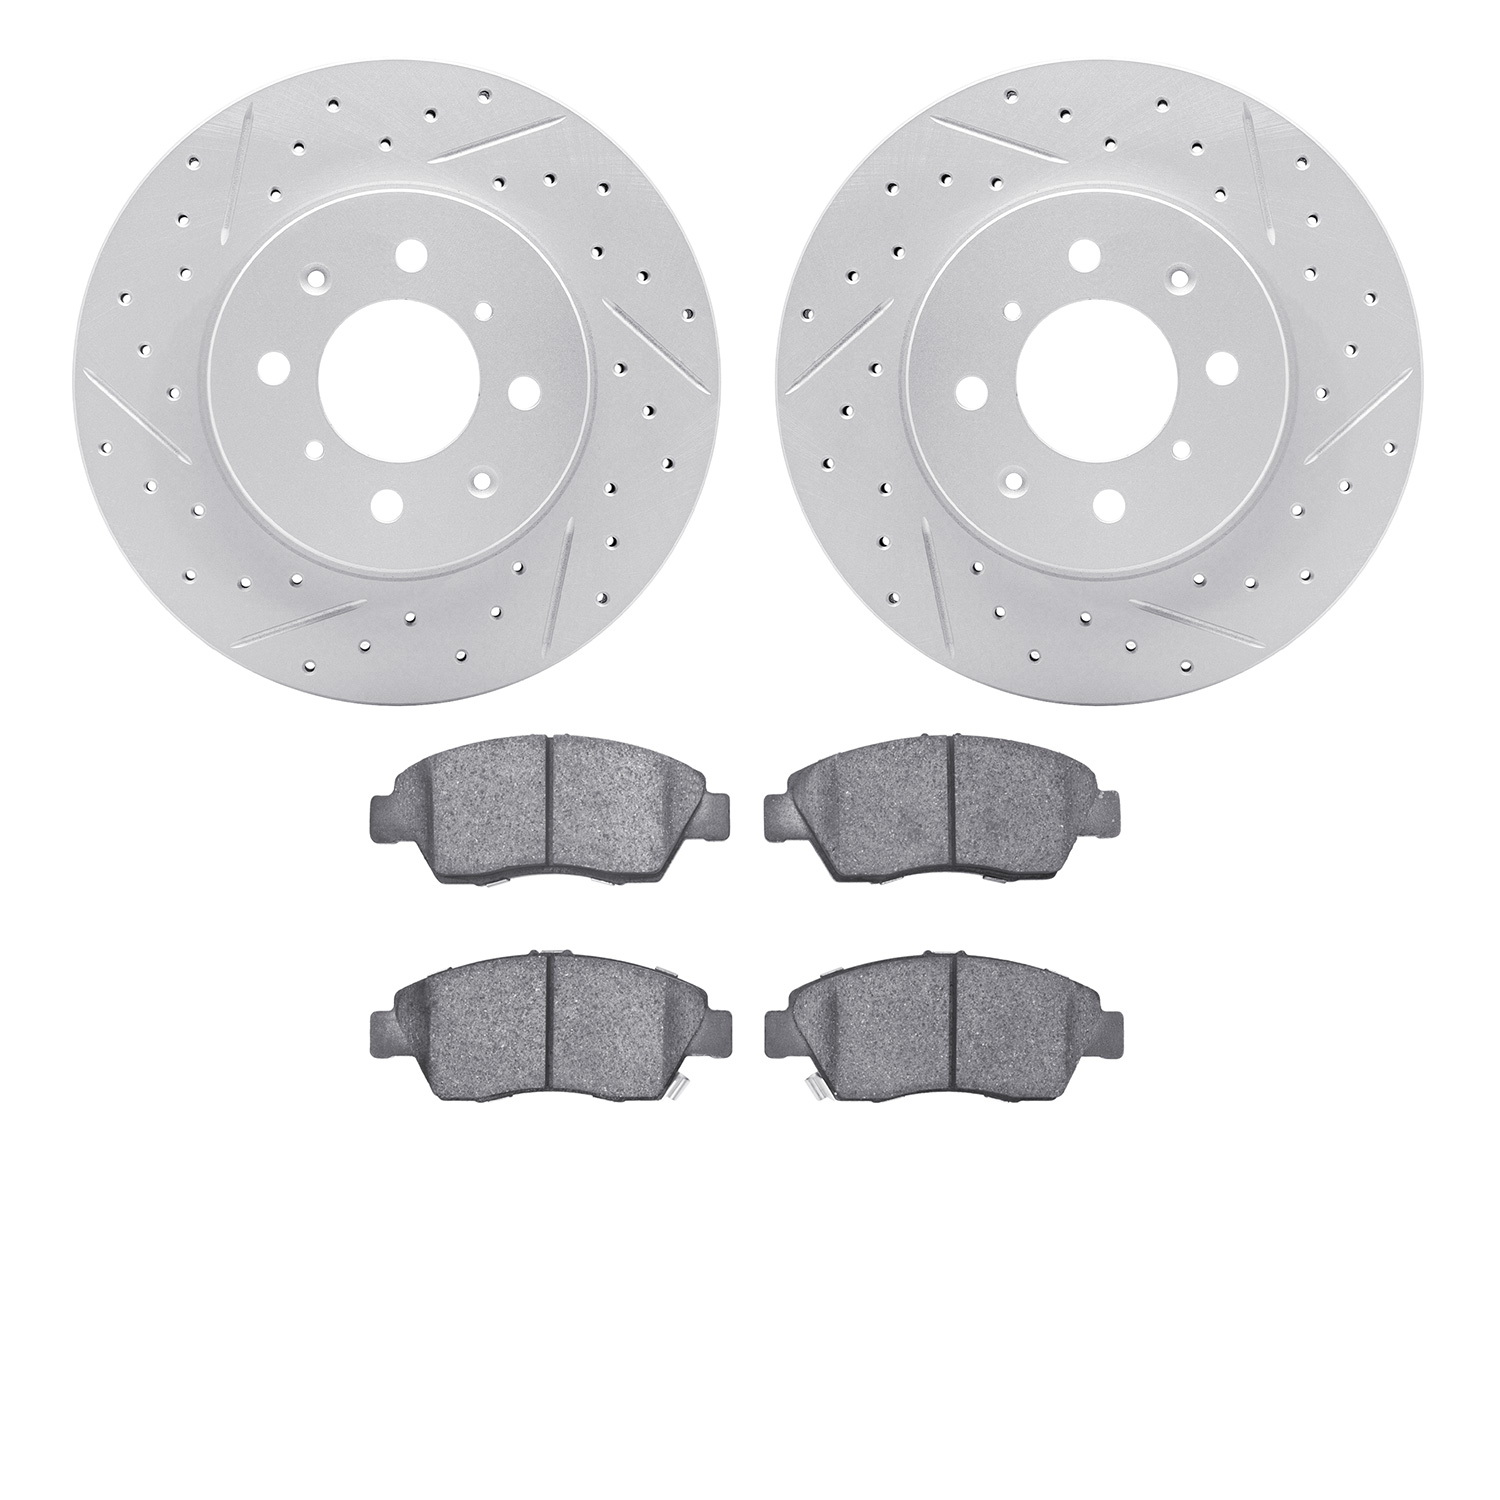 2502-59010 Geoperformance Drilled/Slotted Rotors w/5000 Advanced Brake Pads Kit, 1993-2008 Acura/Honda, Position: Front